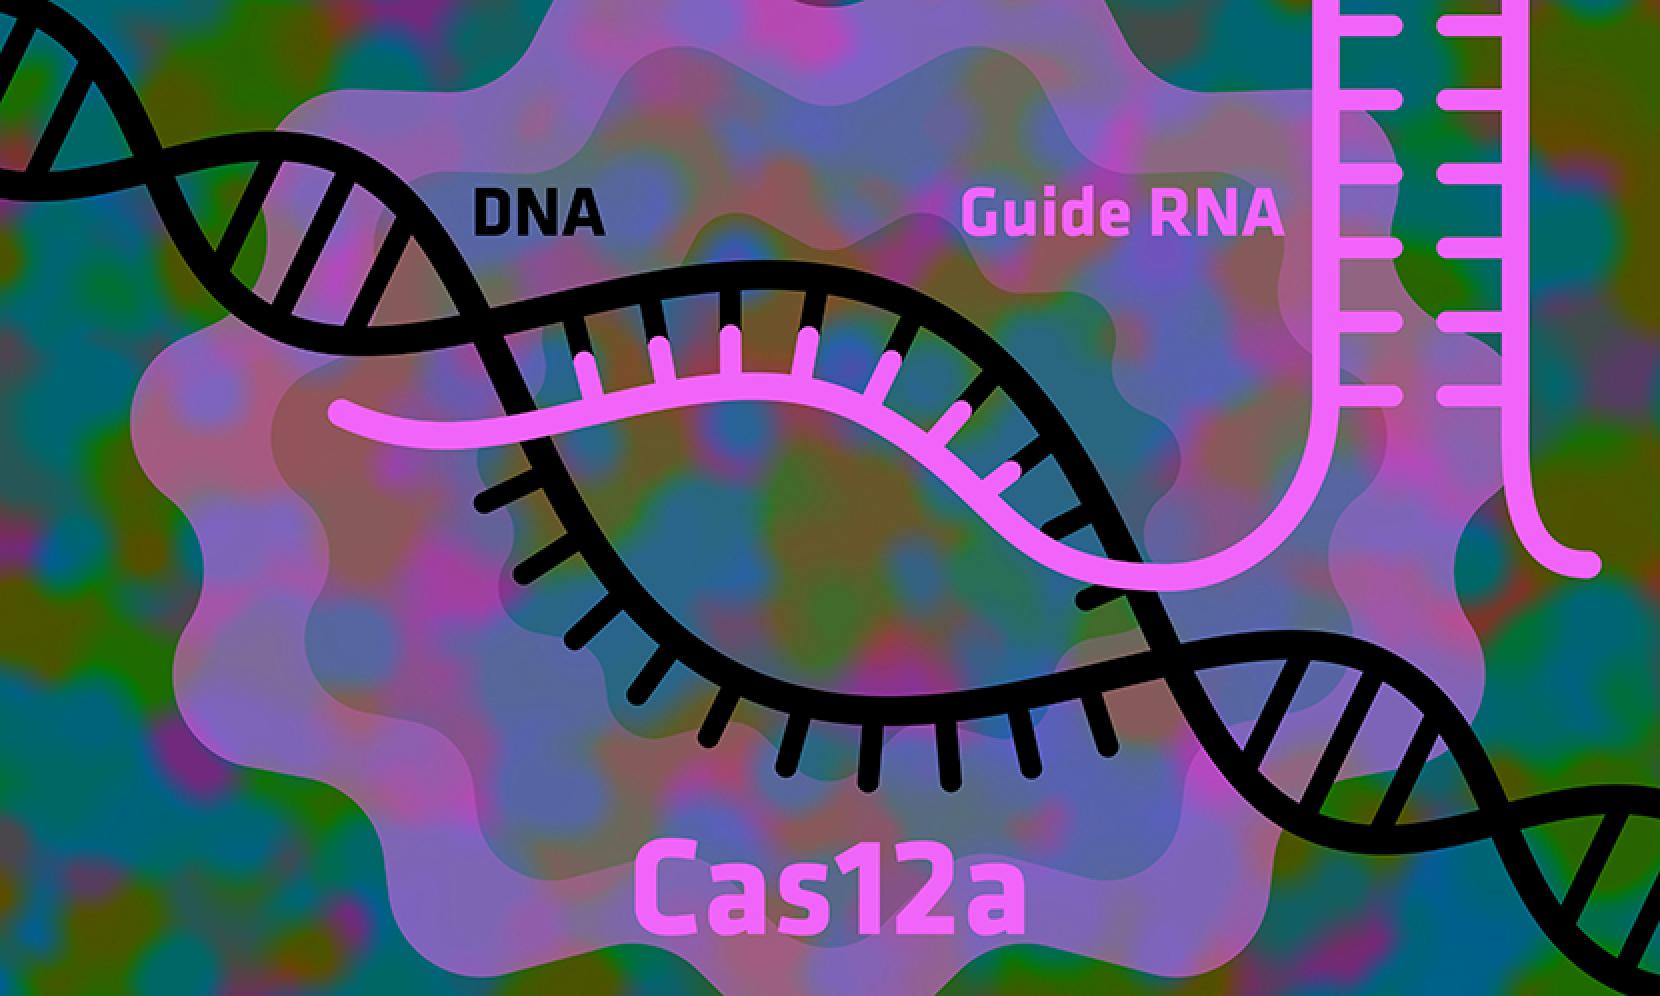 New Cas12a approach could open the door for gene editing safe enough for use in humans